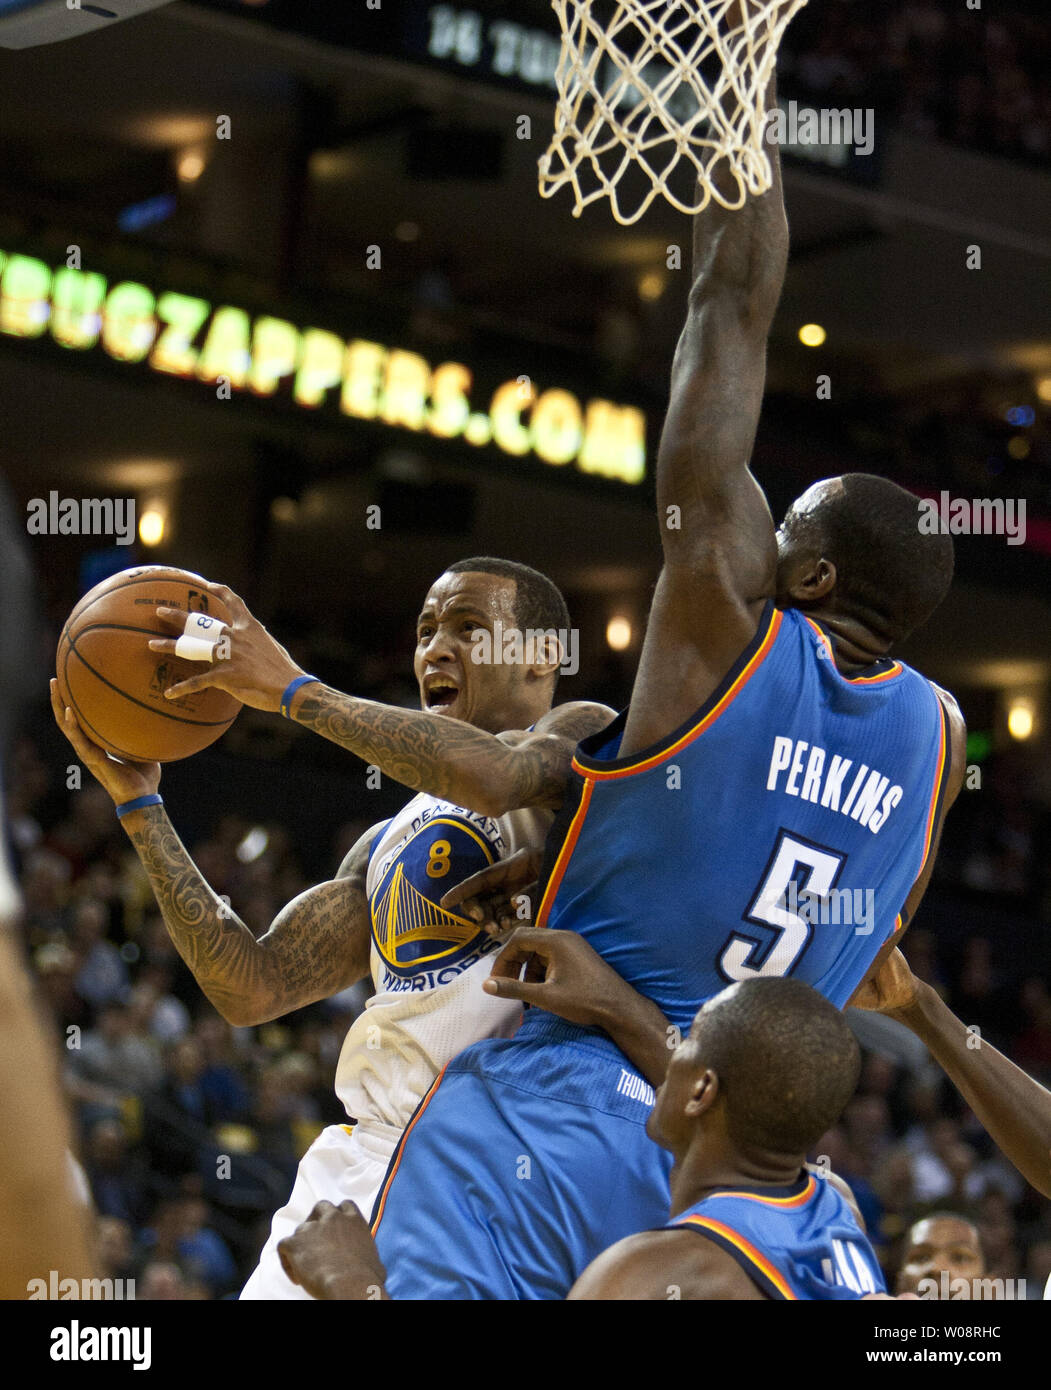 Golden State Warriors Stephen Curry (30) throws up a shot back at the  basket around Oklahoma City Thunder's Kendrick Perkins in the first half at  the Oracle Arena in Oakland, California on